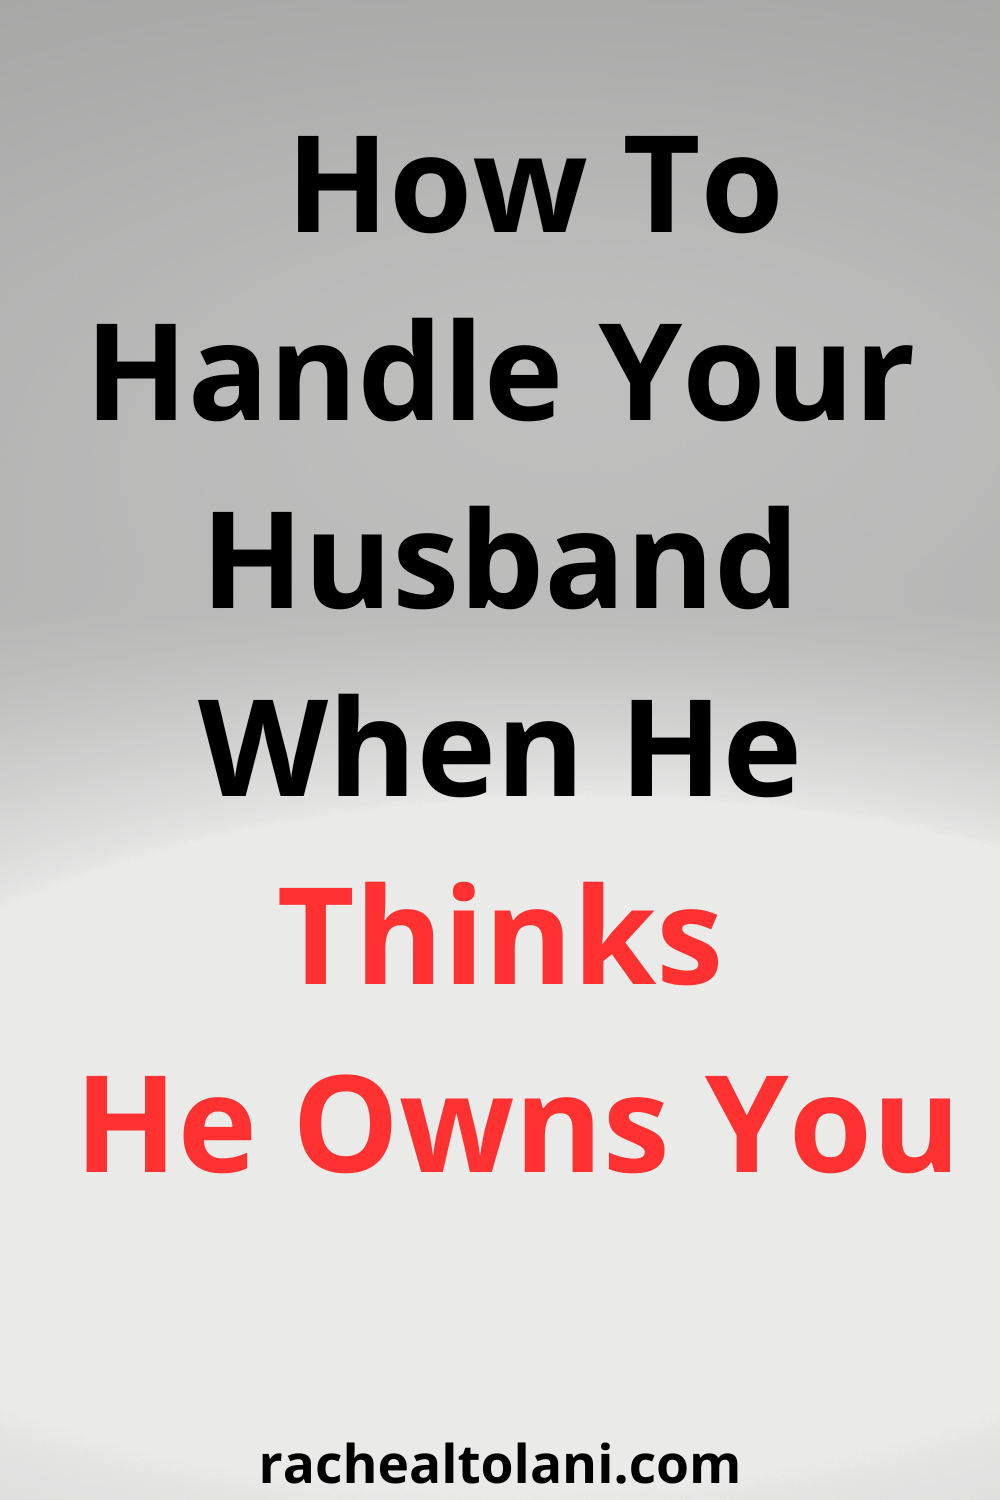 What makes your boyfriend think he owns you